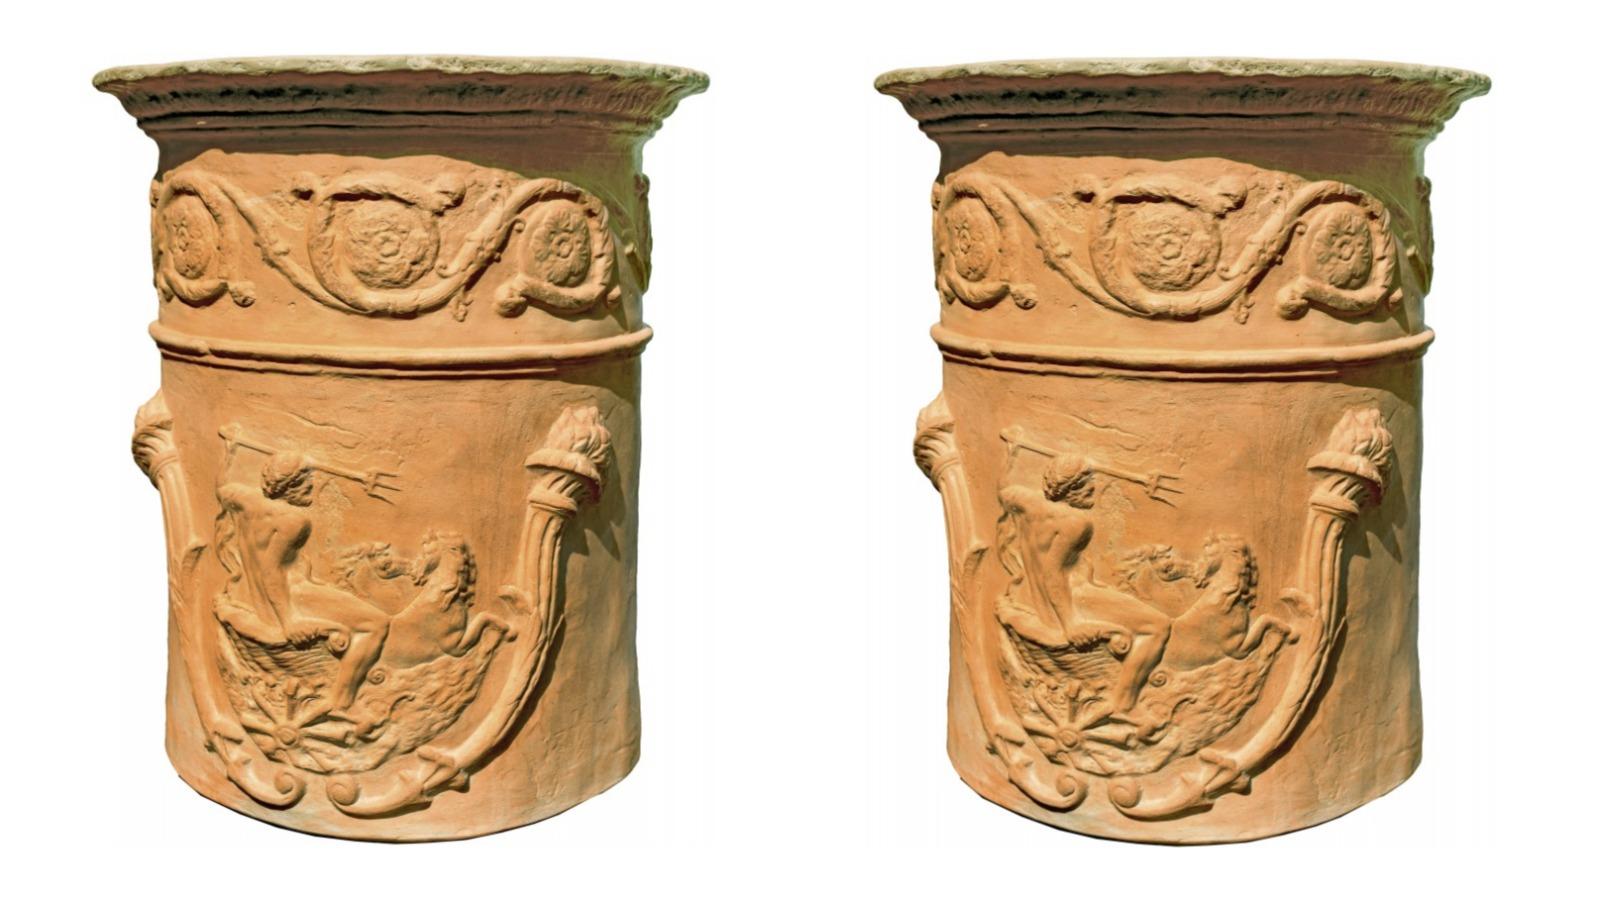 pair of Italian vase of neptune ø65cm - cylindrical early 20th century

Copy of a roman vase from the 2nd century AD
Copy of a cylindrical vase from the Roman period (Trajanic period), LARGE MODEL.
Light terracotta
Decorated above with double